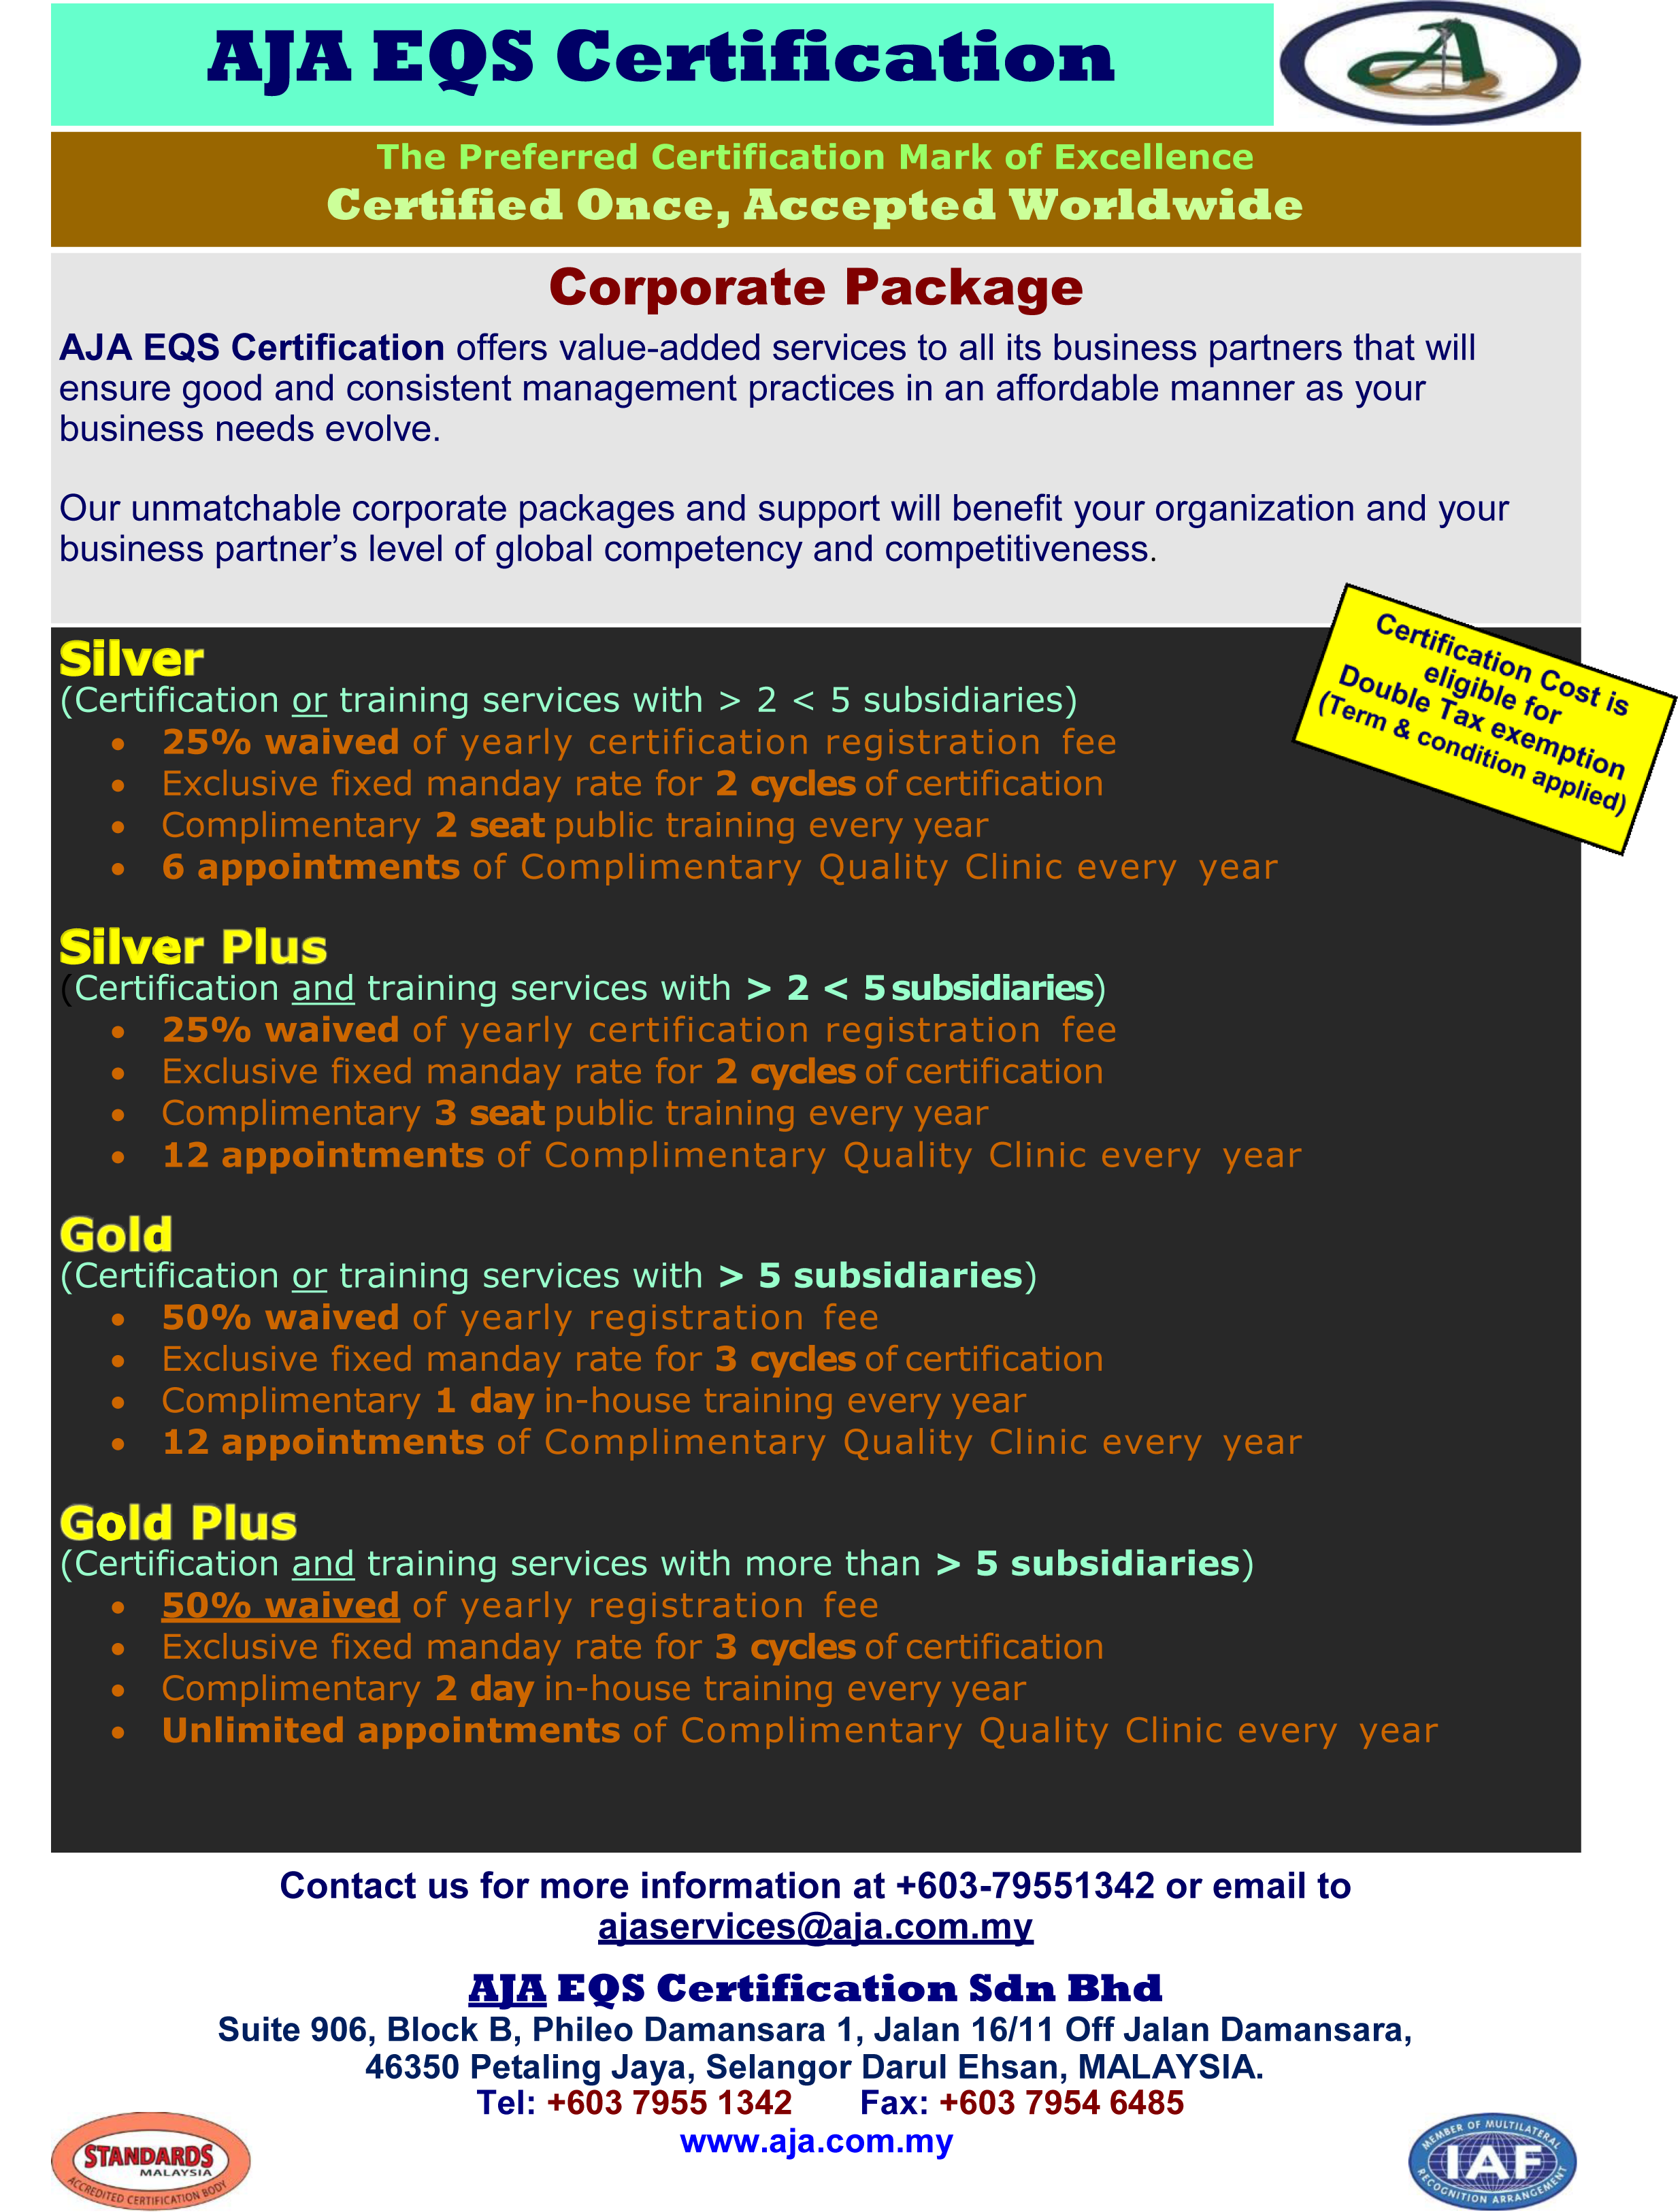 corporate-package